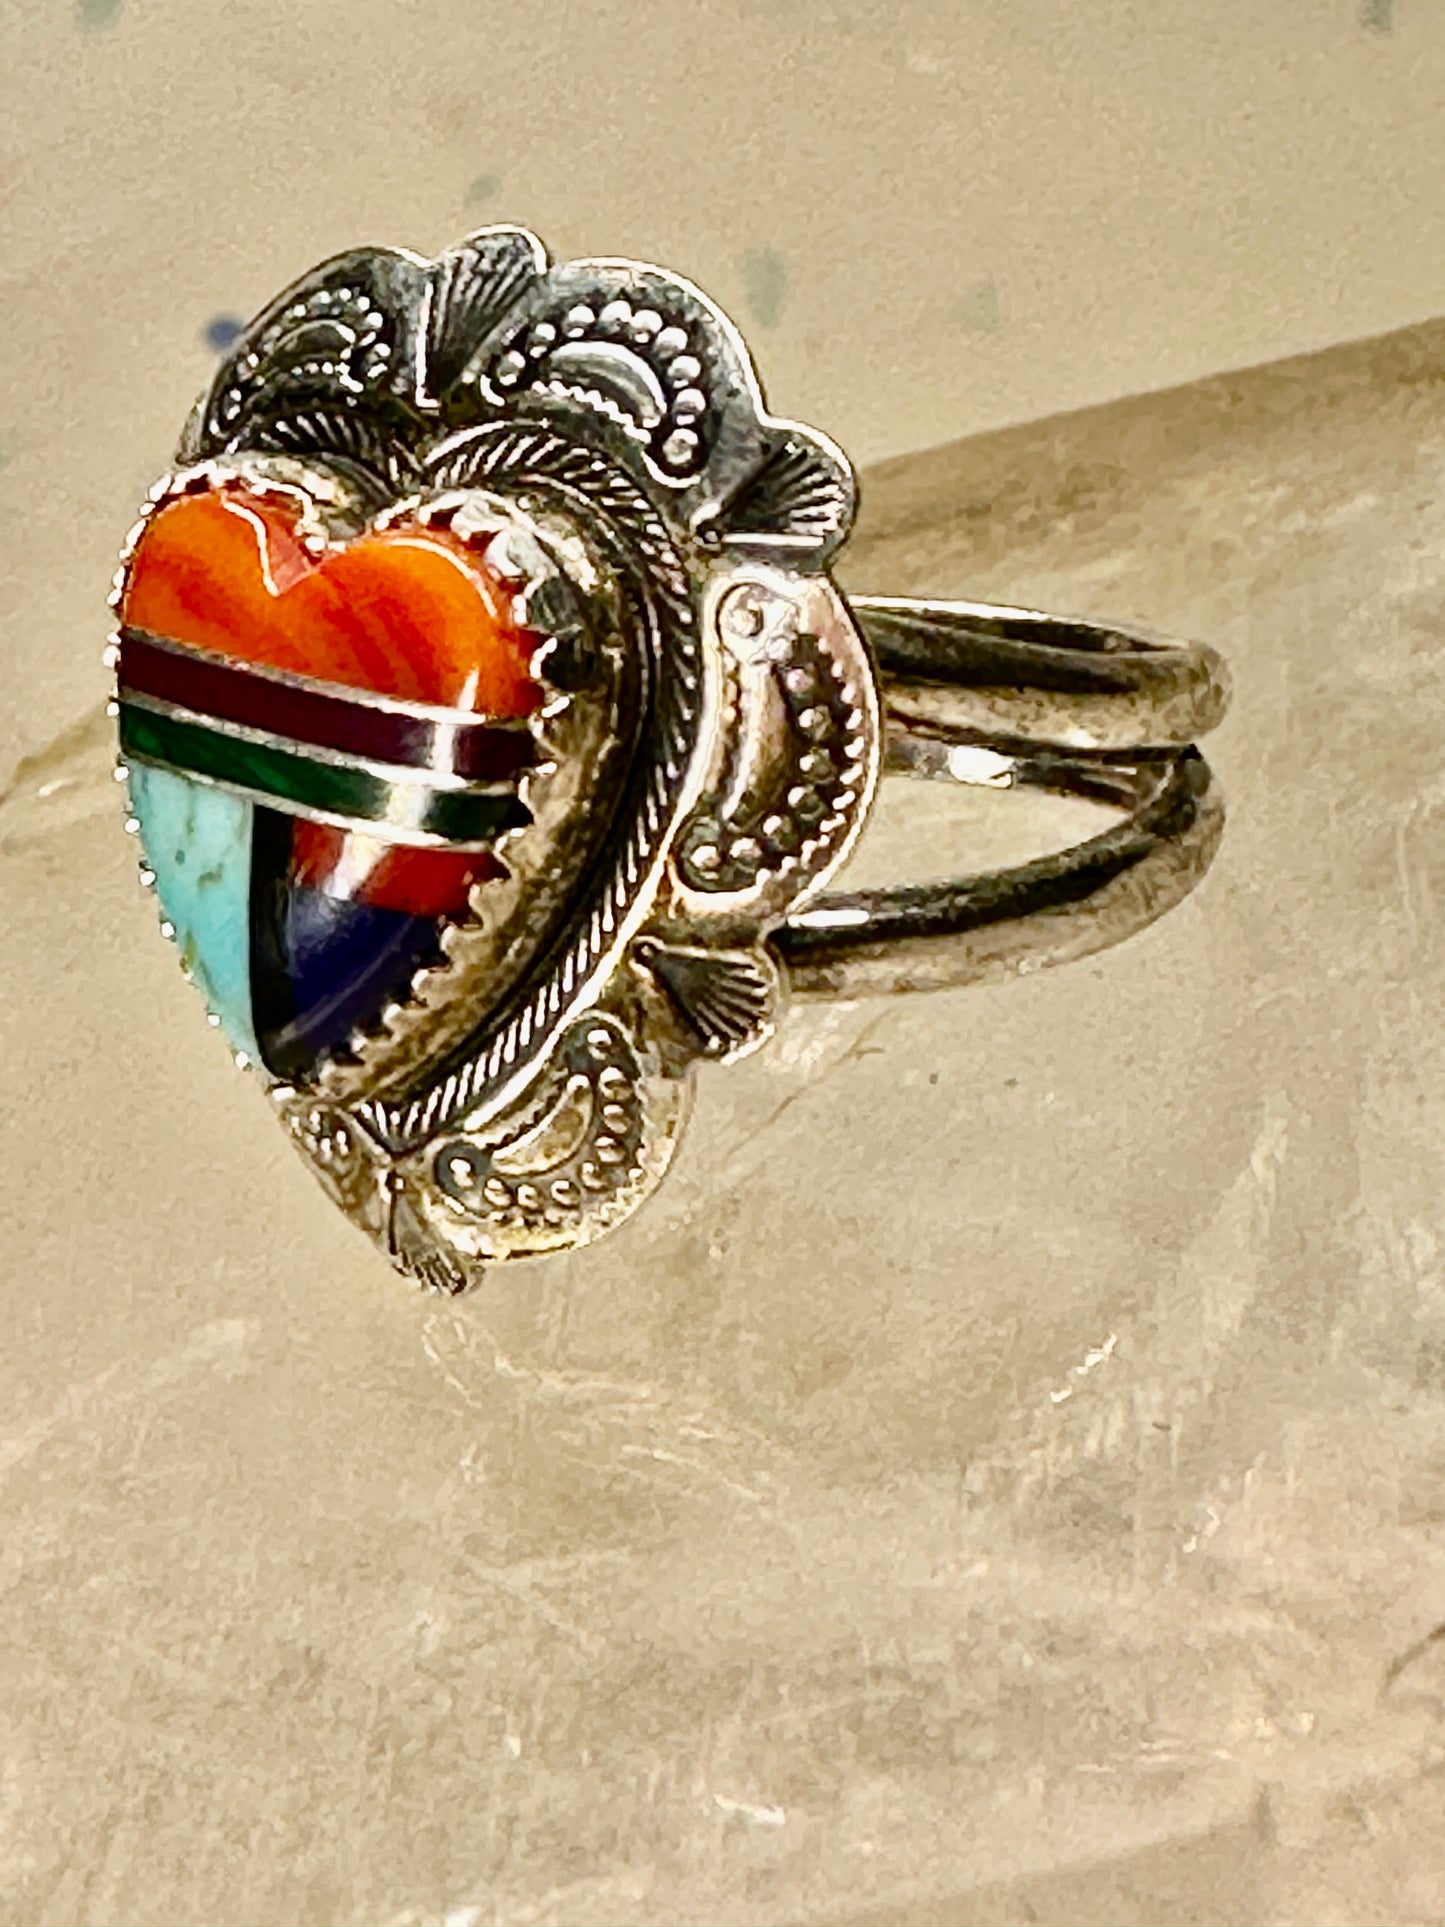 Heart ring Turquoise Coral southwest size 5.50 sterling silver girls women